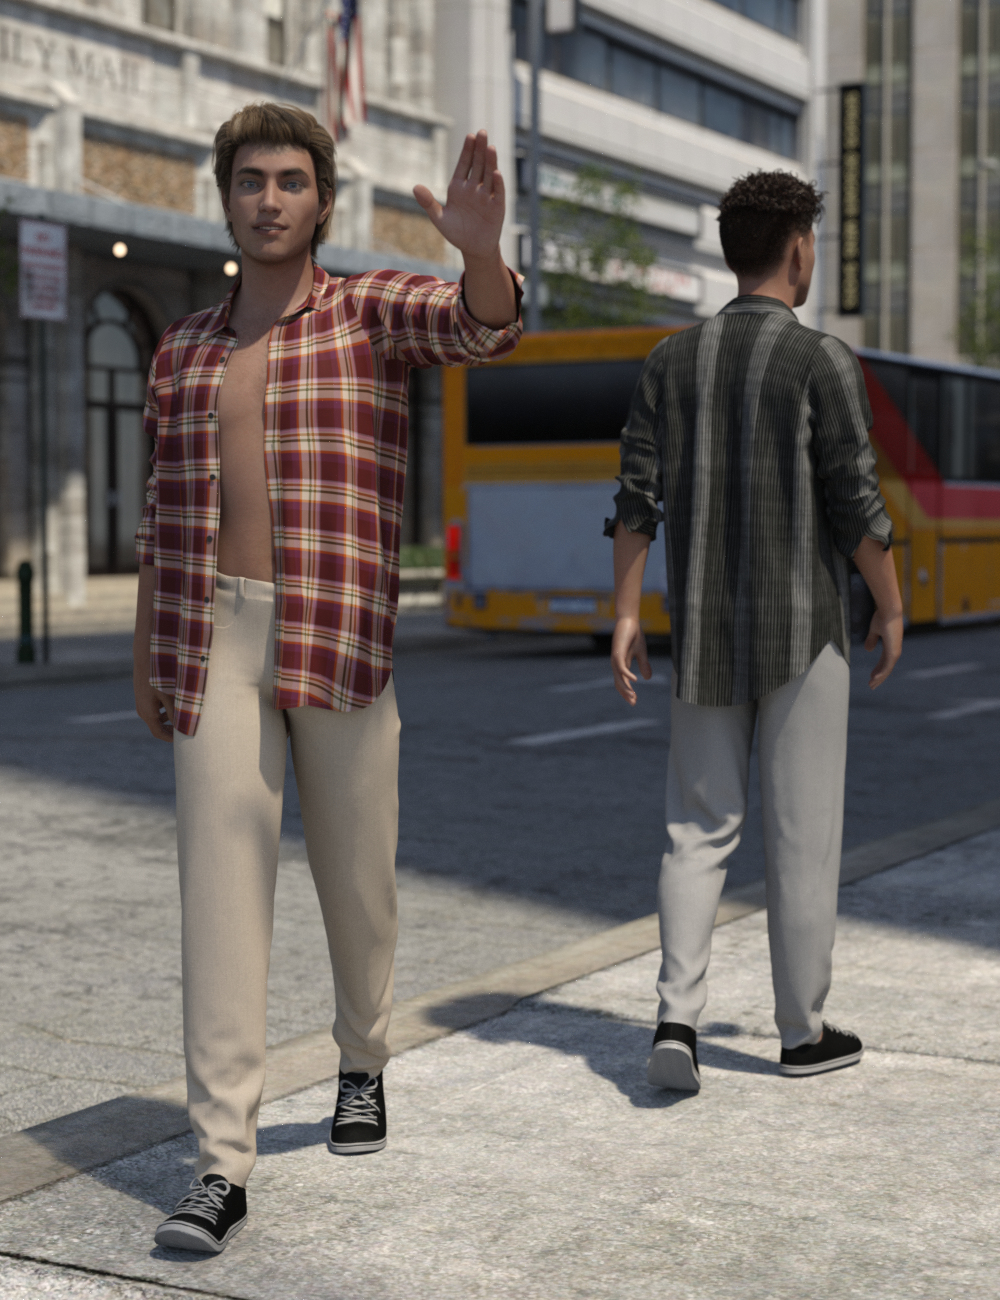 Casual Styles Textures for dForce My Guy Jeans and Shirt by: IDG DesignsDestinysGarden, 3D Models by Daz 3D